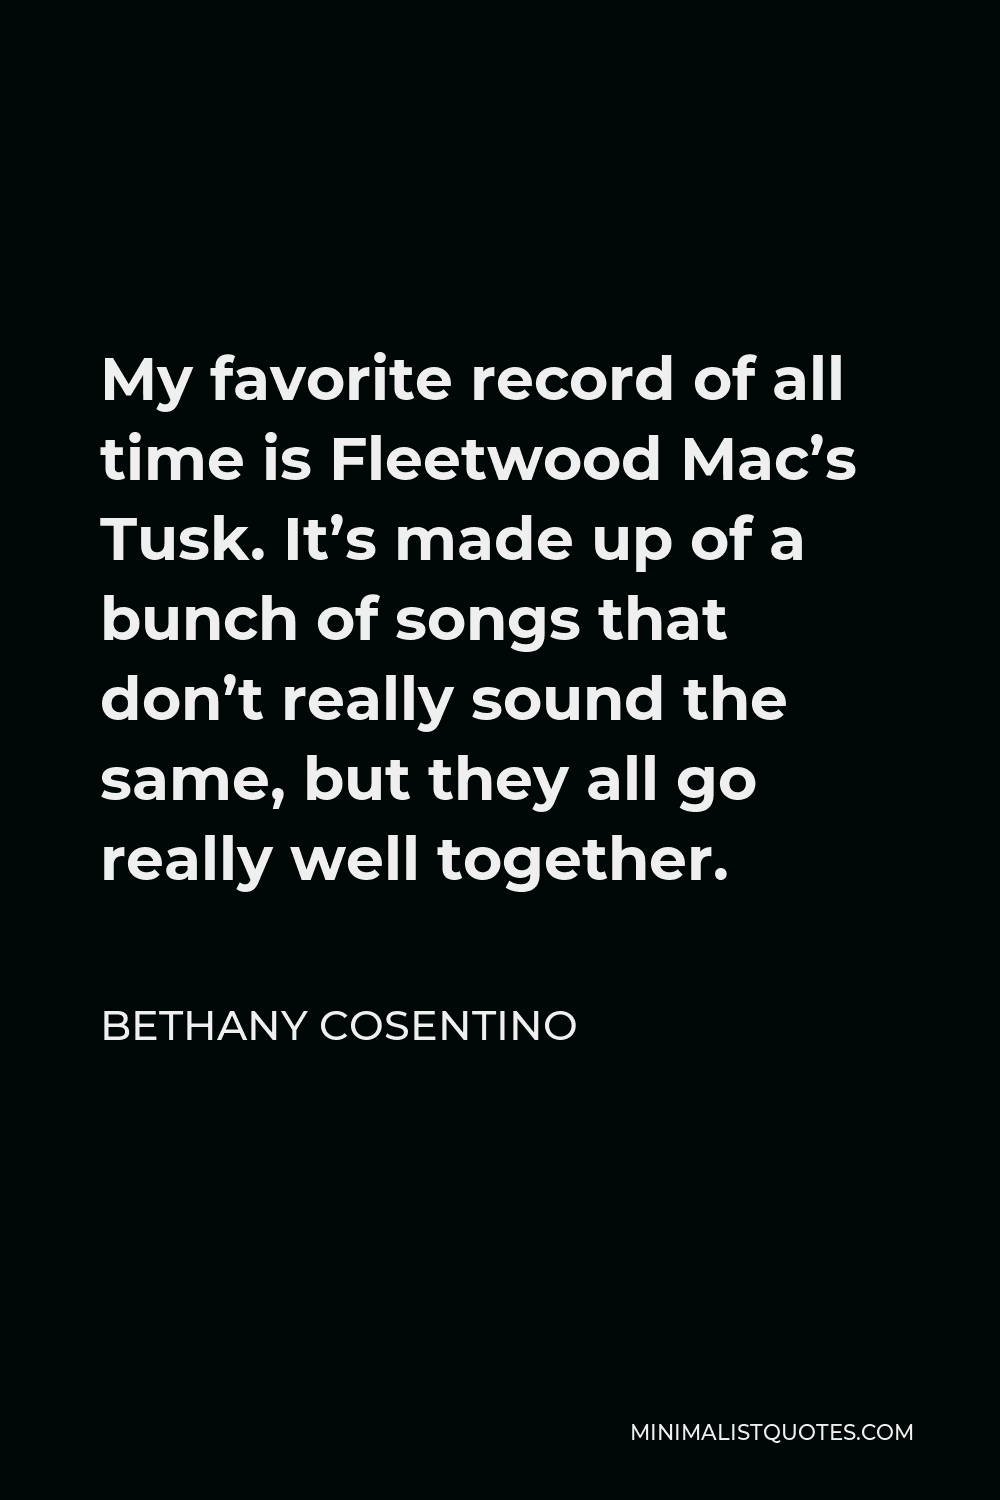 Bethany Cosentino Quote - My favorite record of all time is Fleetwood Mac’s Tusk. It’s made up of a bunch of songs that don’t really sound the same, but they all go really well together.